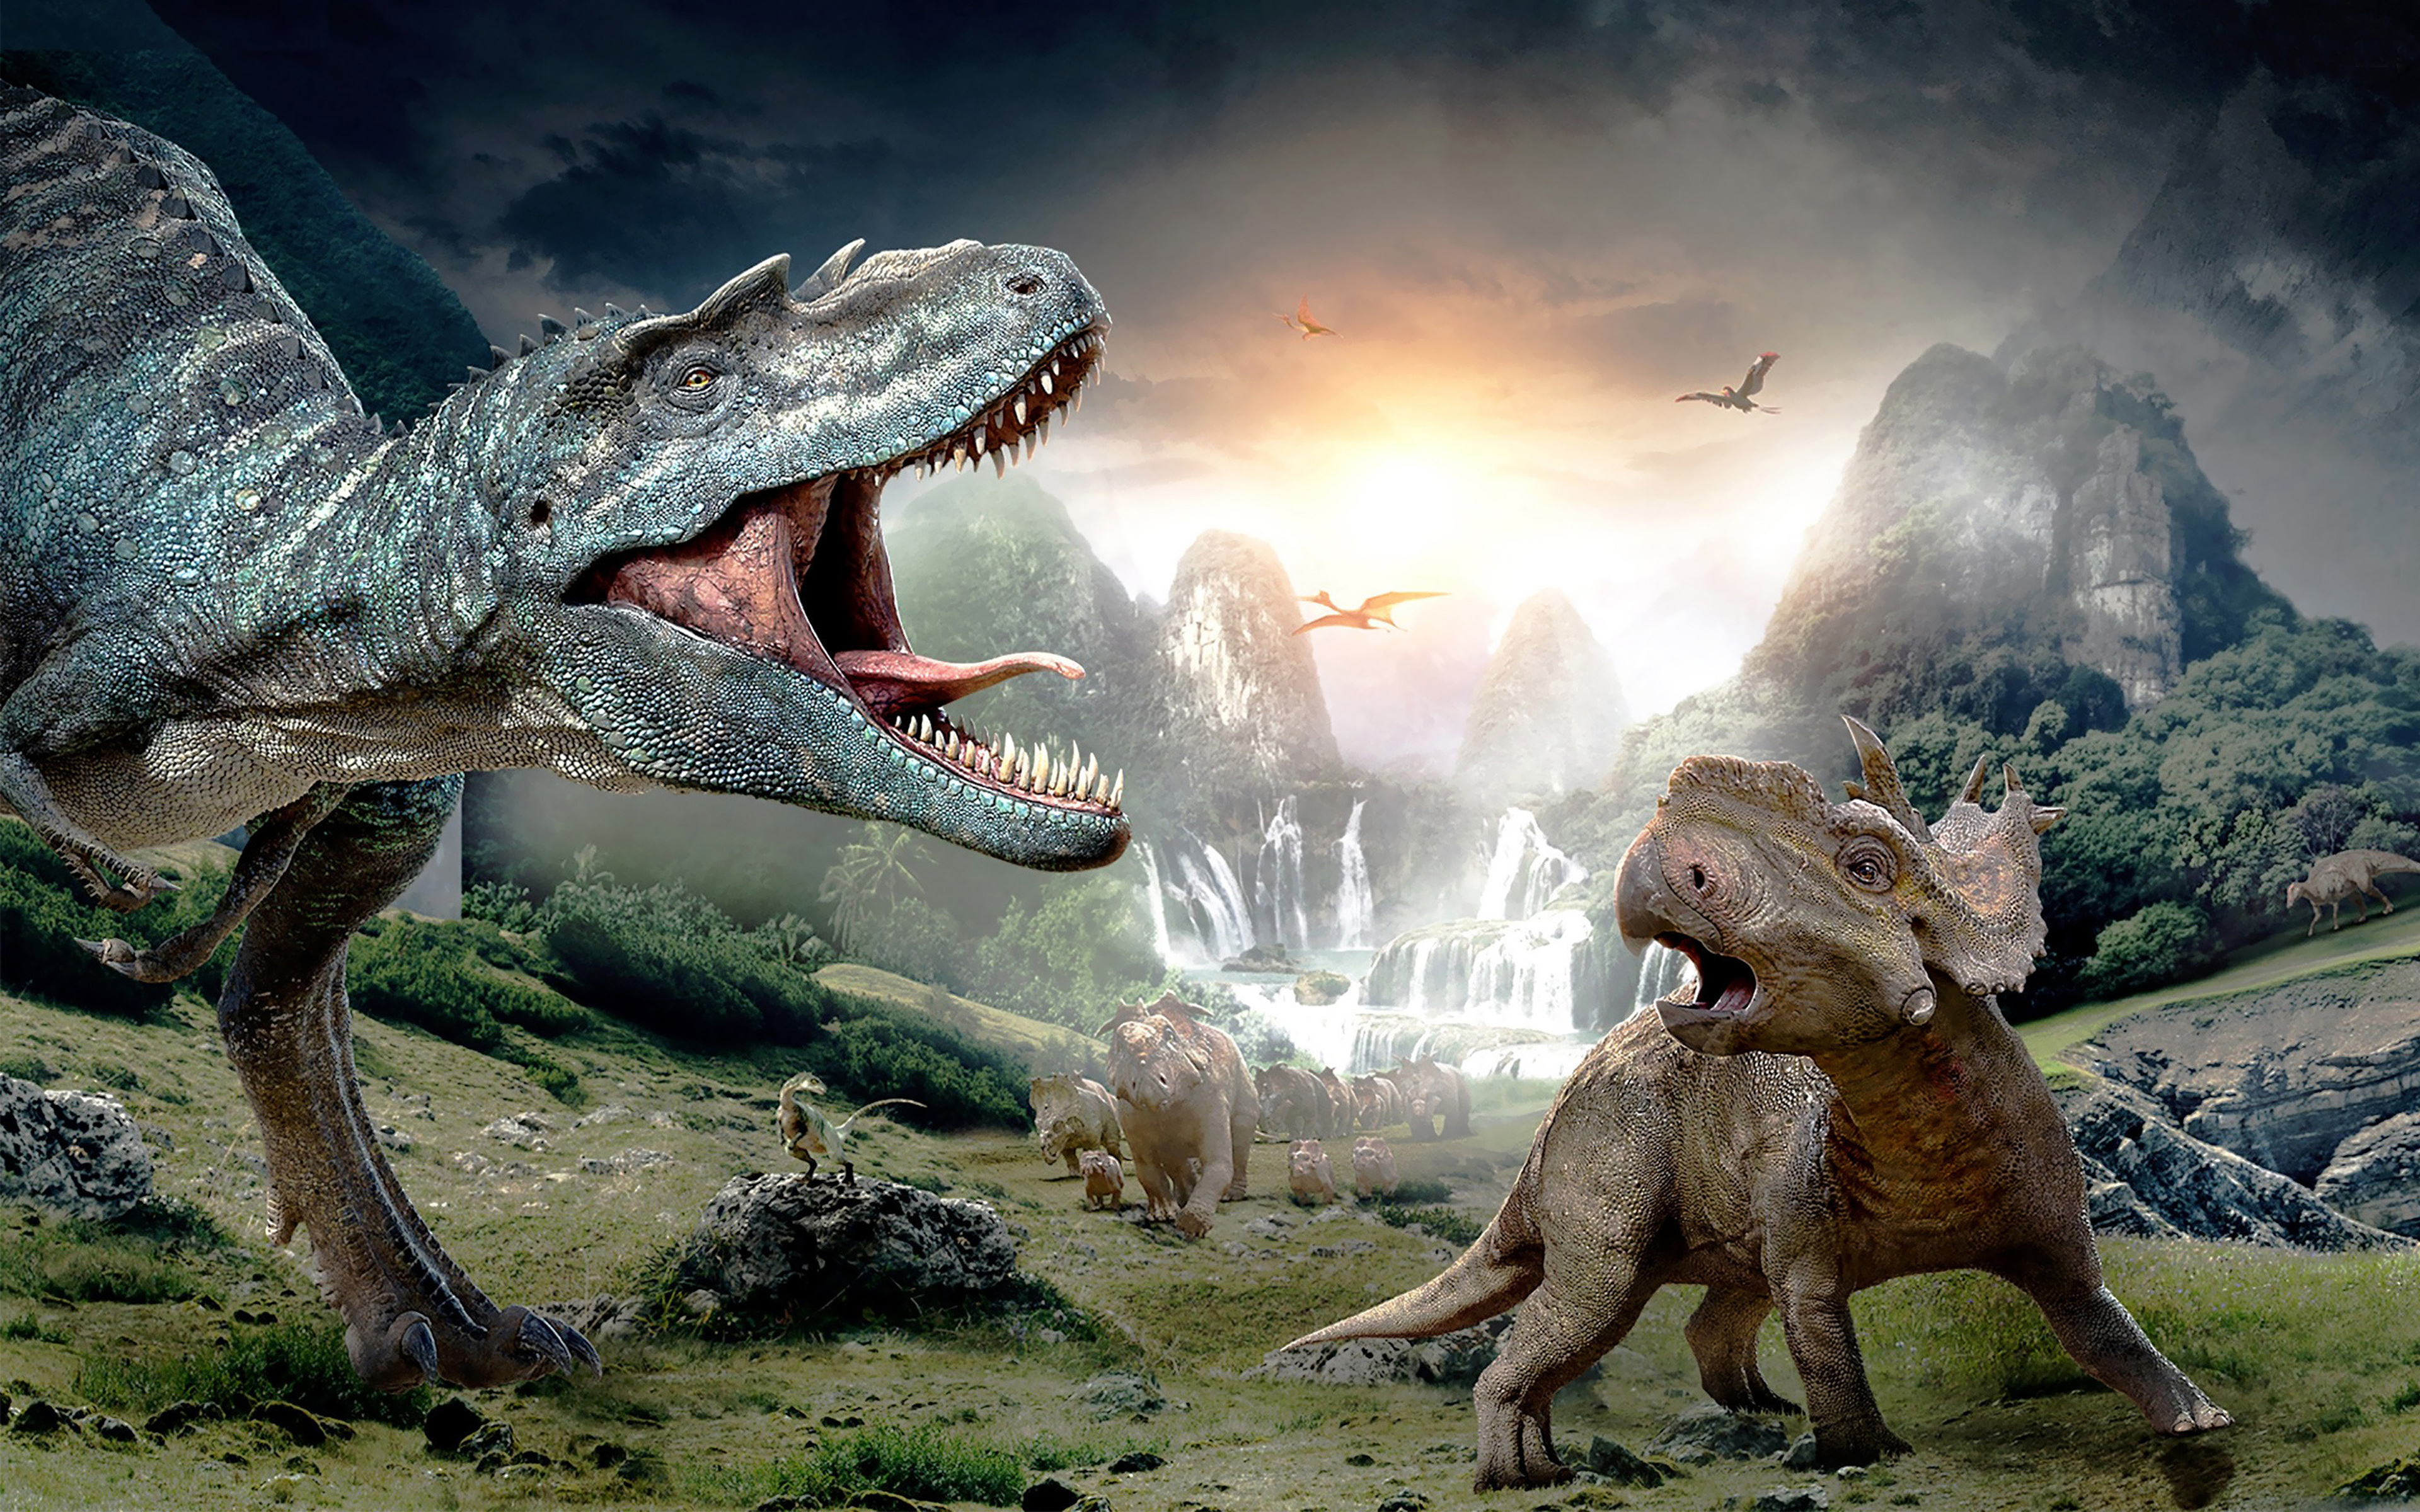 Dinosaurs Wallpapers Hd Download : 